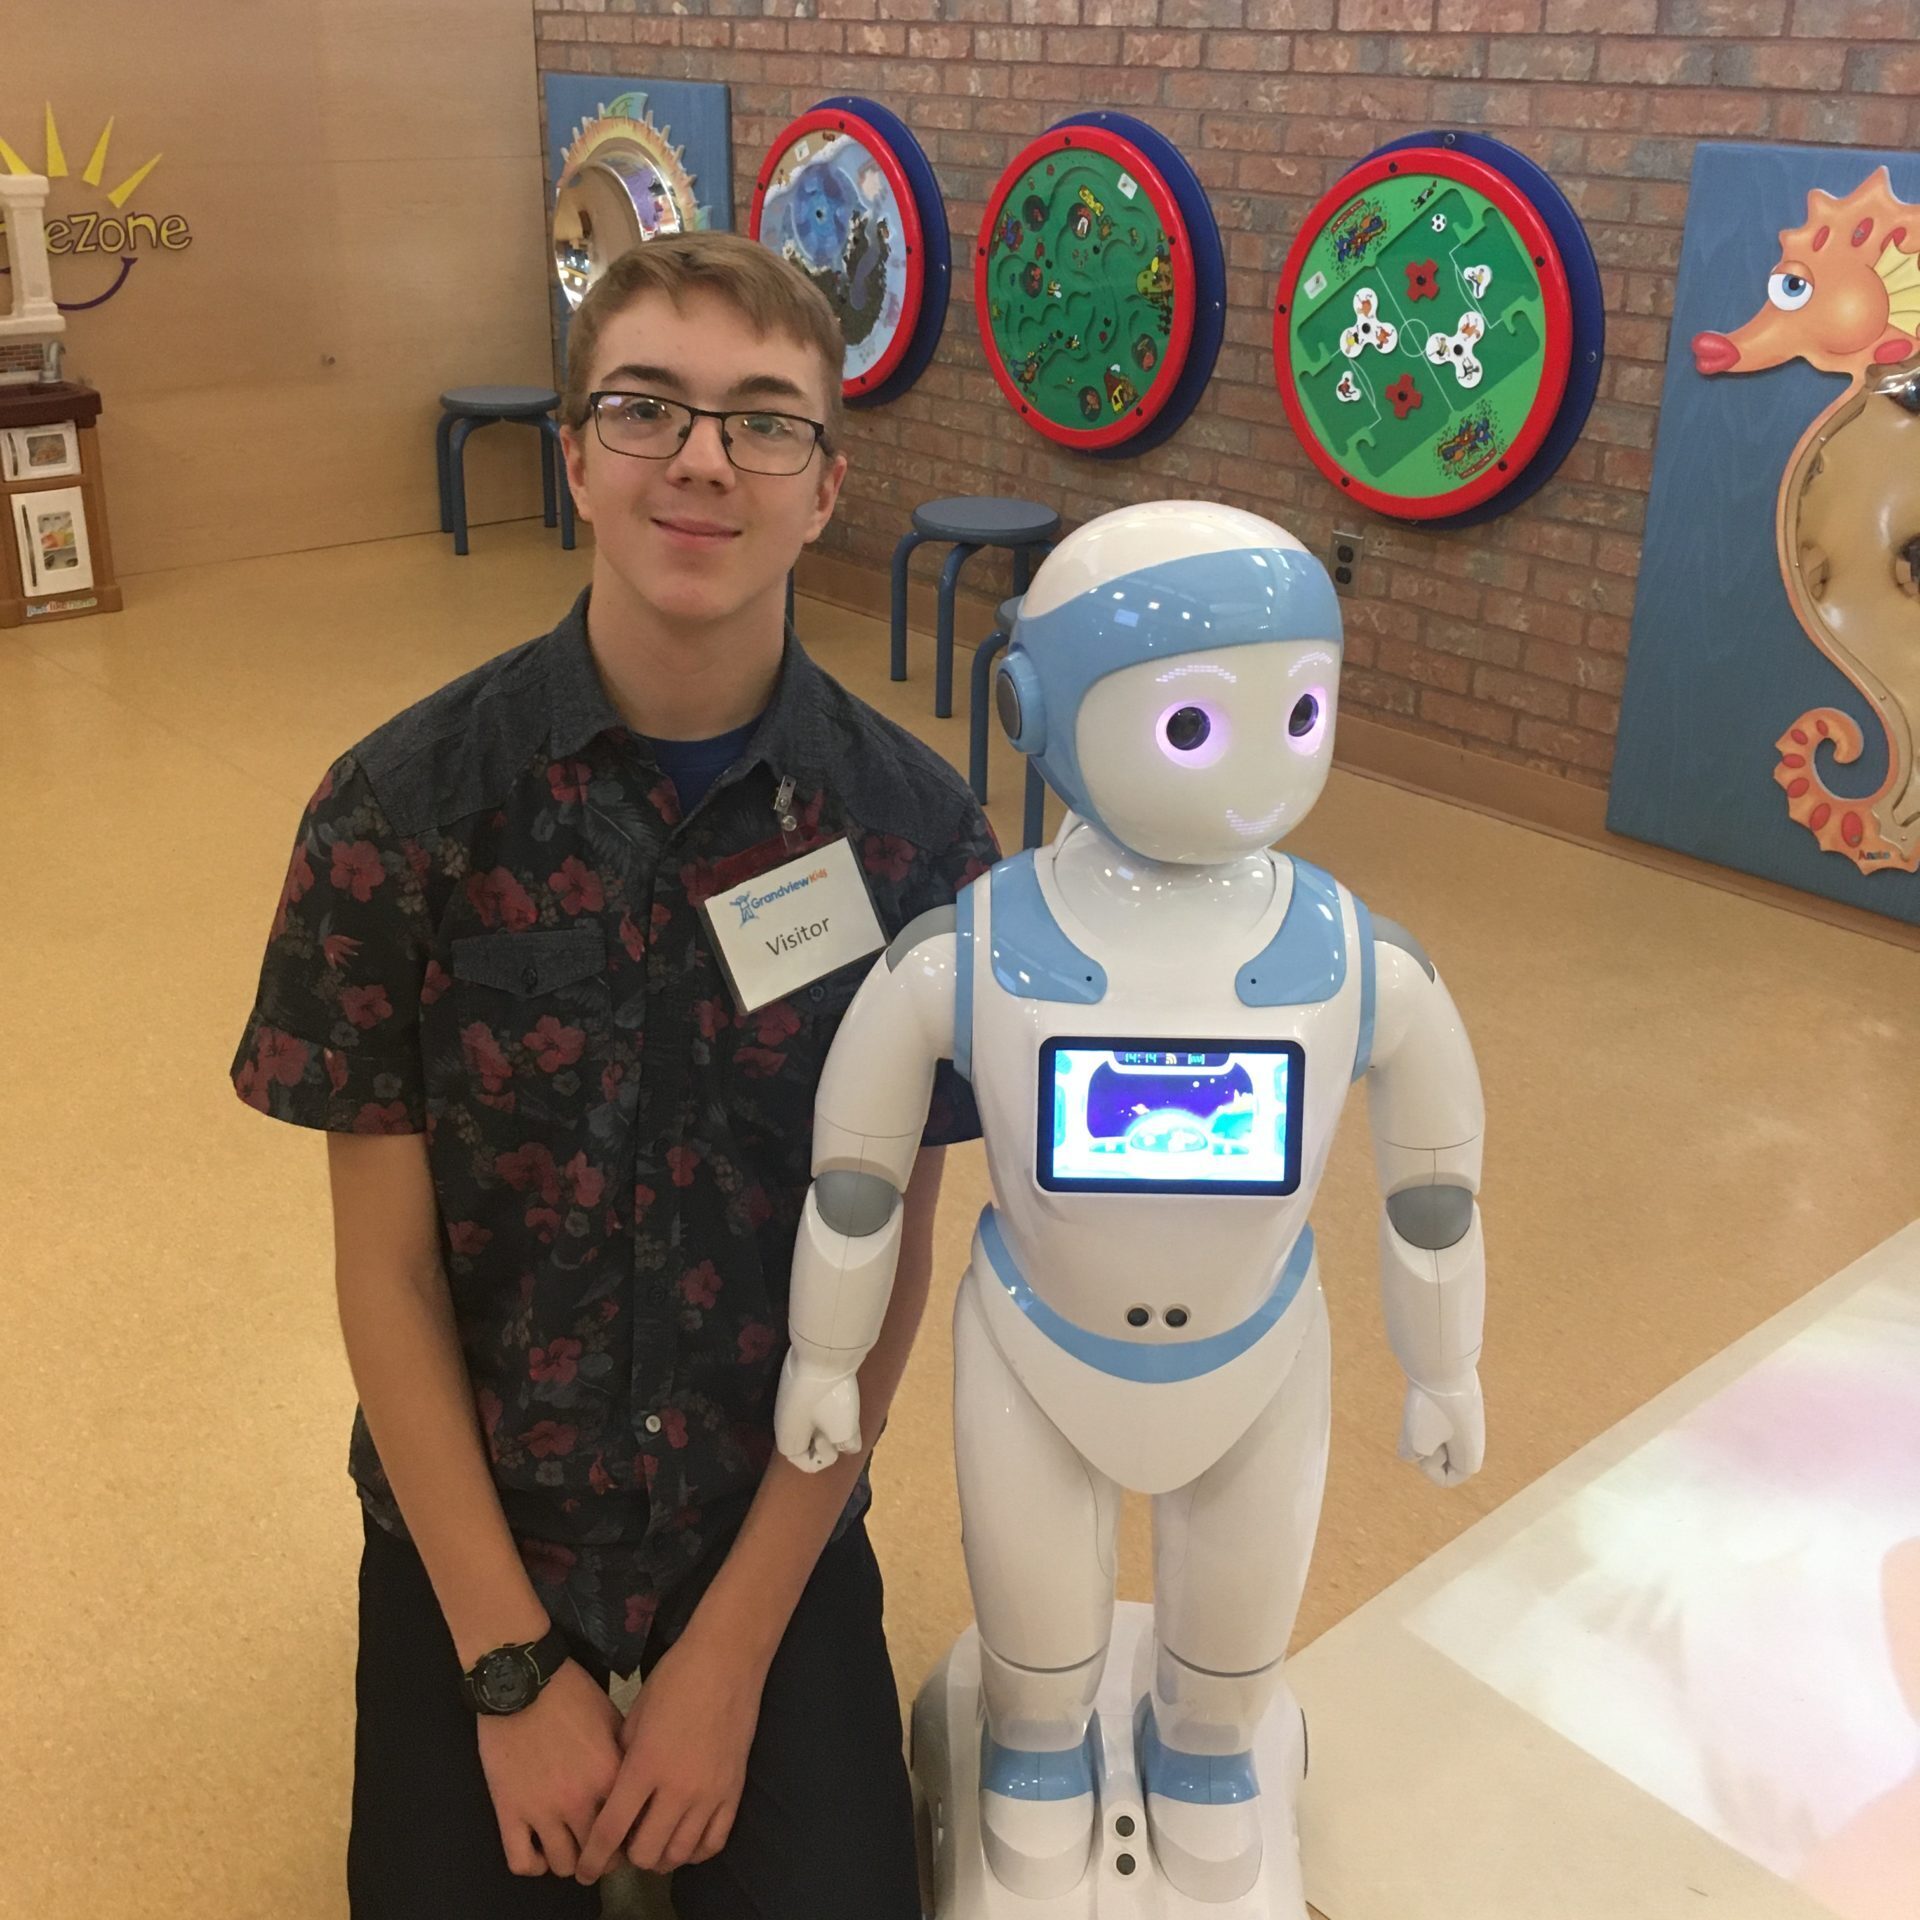 Joy the robot posing with Ethan at Grandview